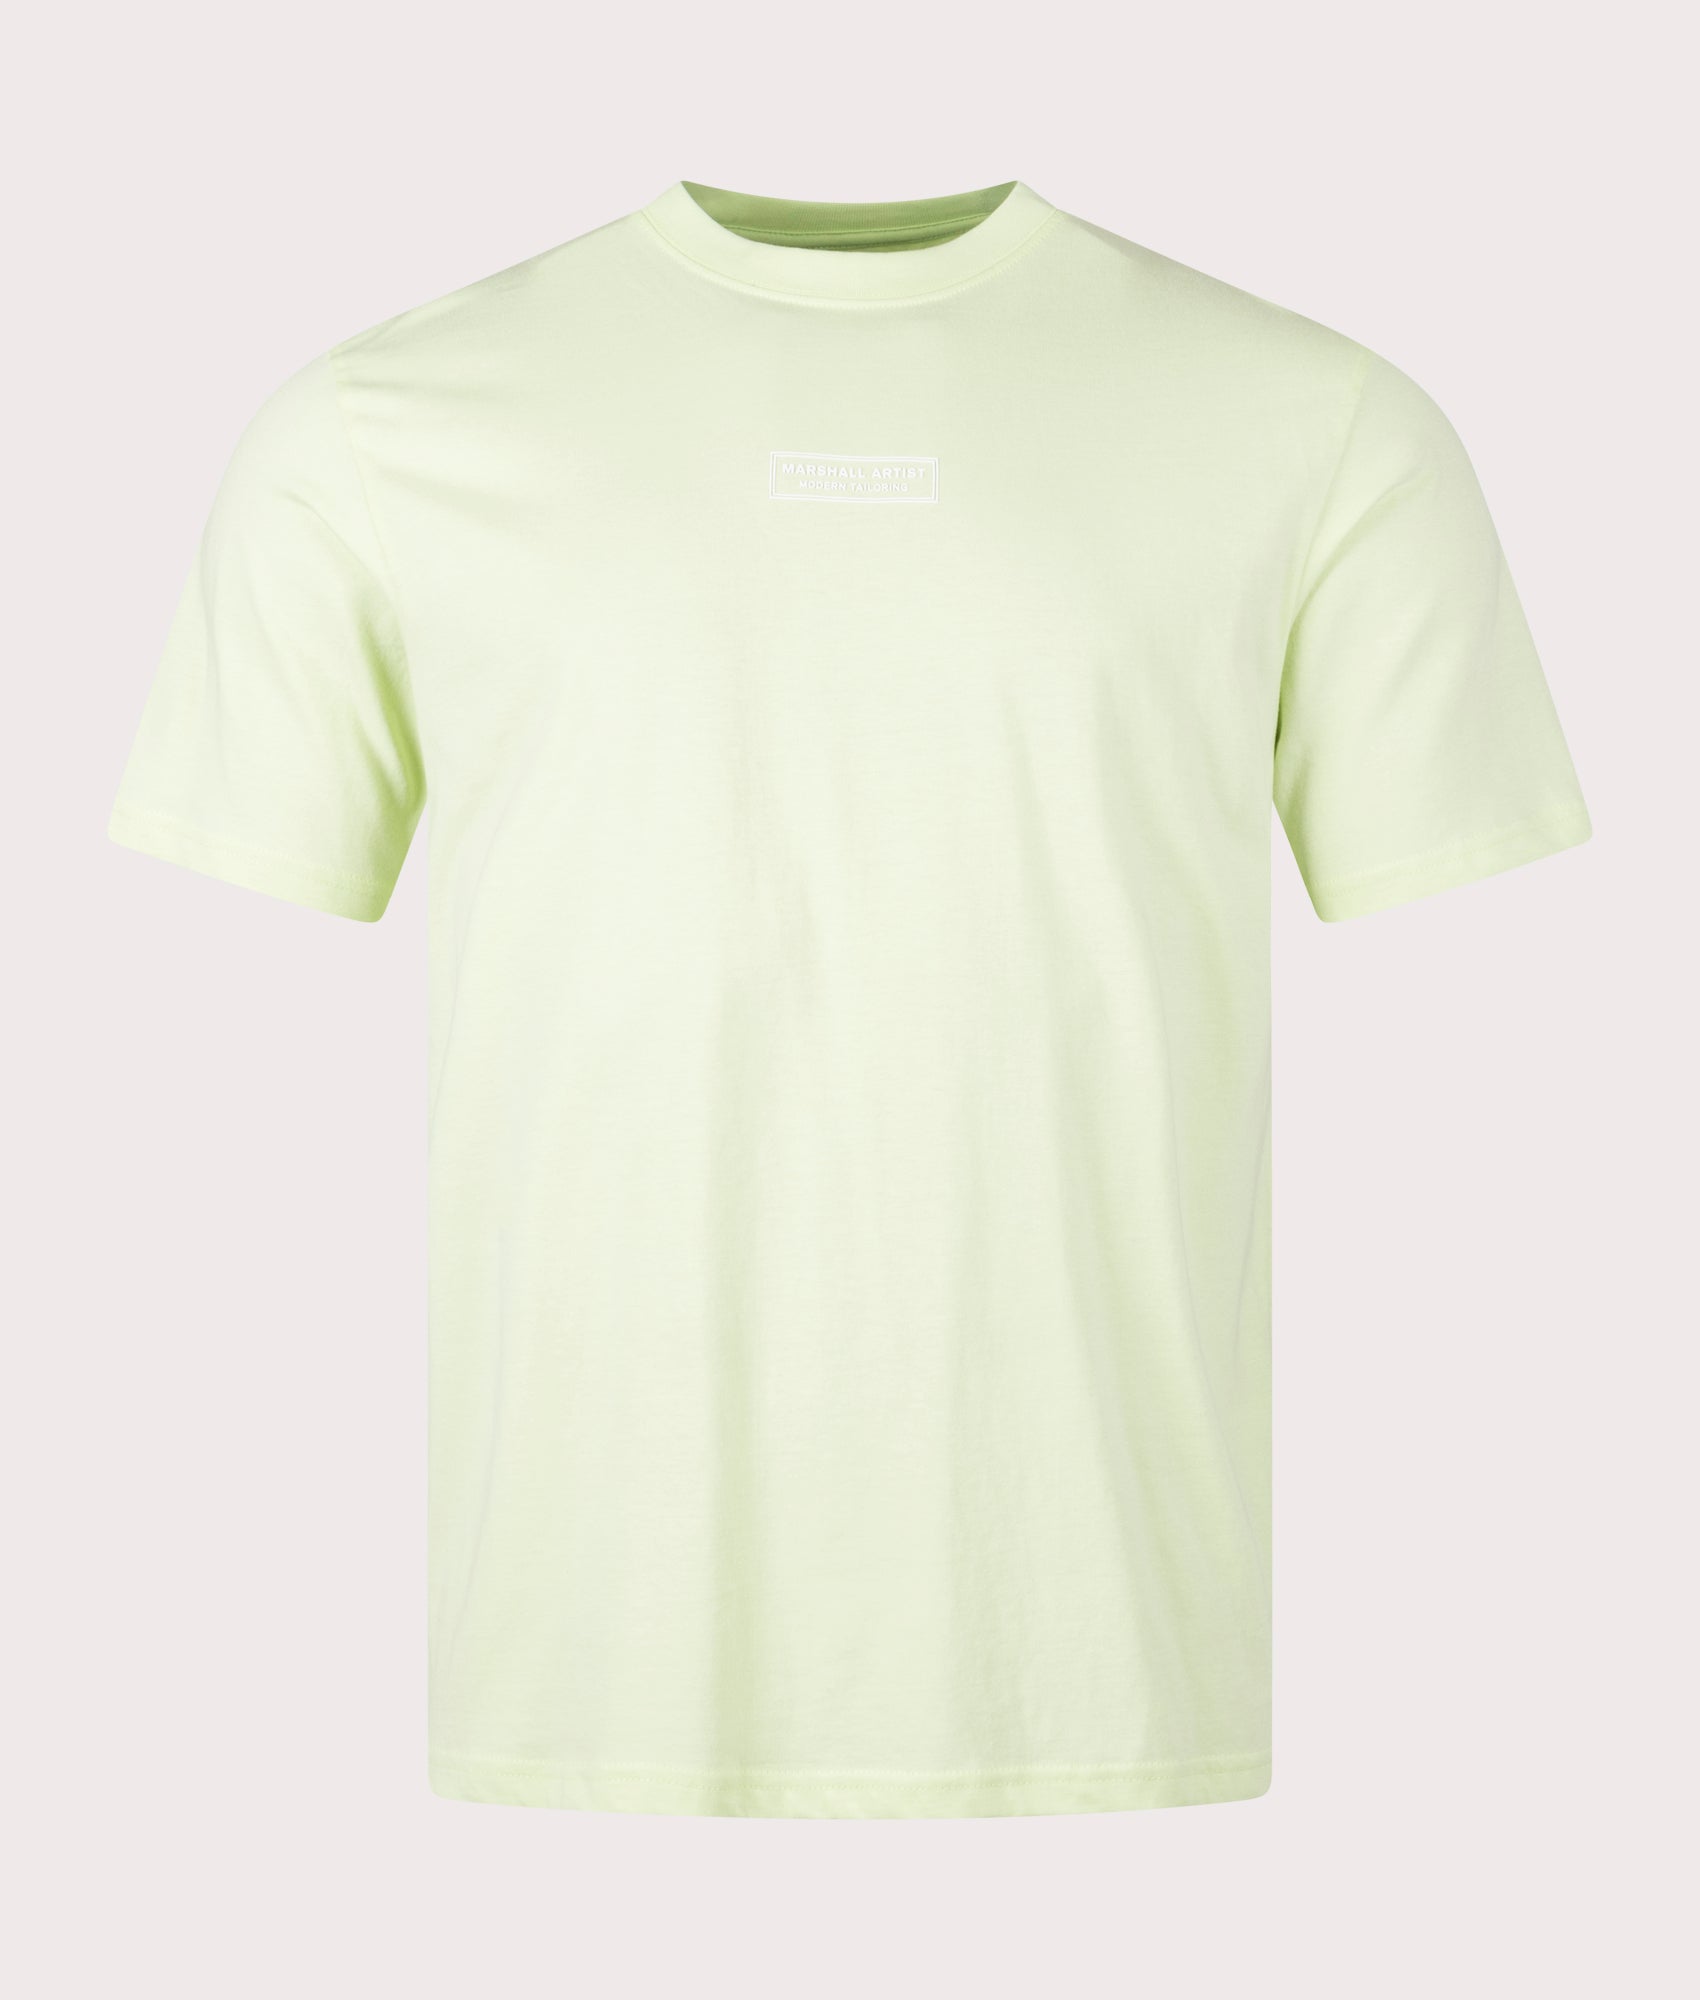 Marshall Artist Mens Injection T-Shirt - Colour: 073 Lime - Size: Large